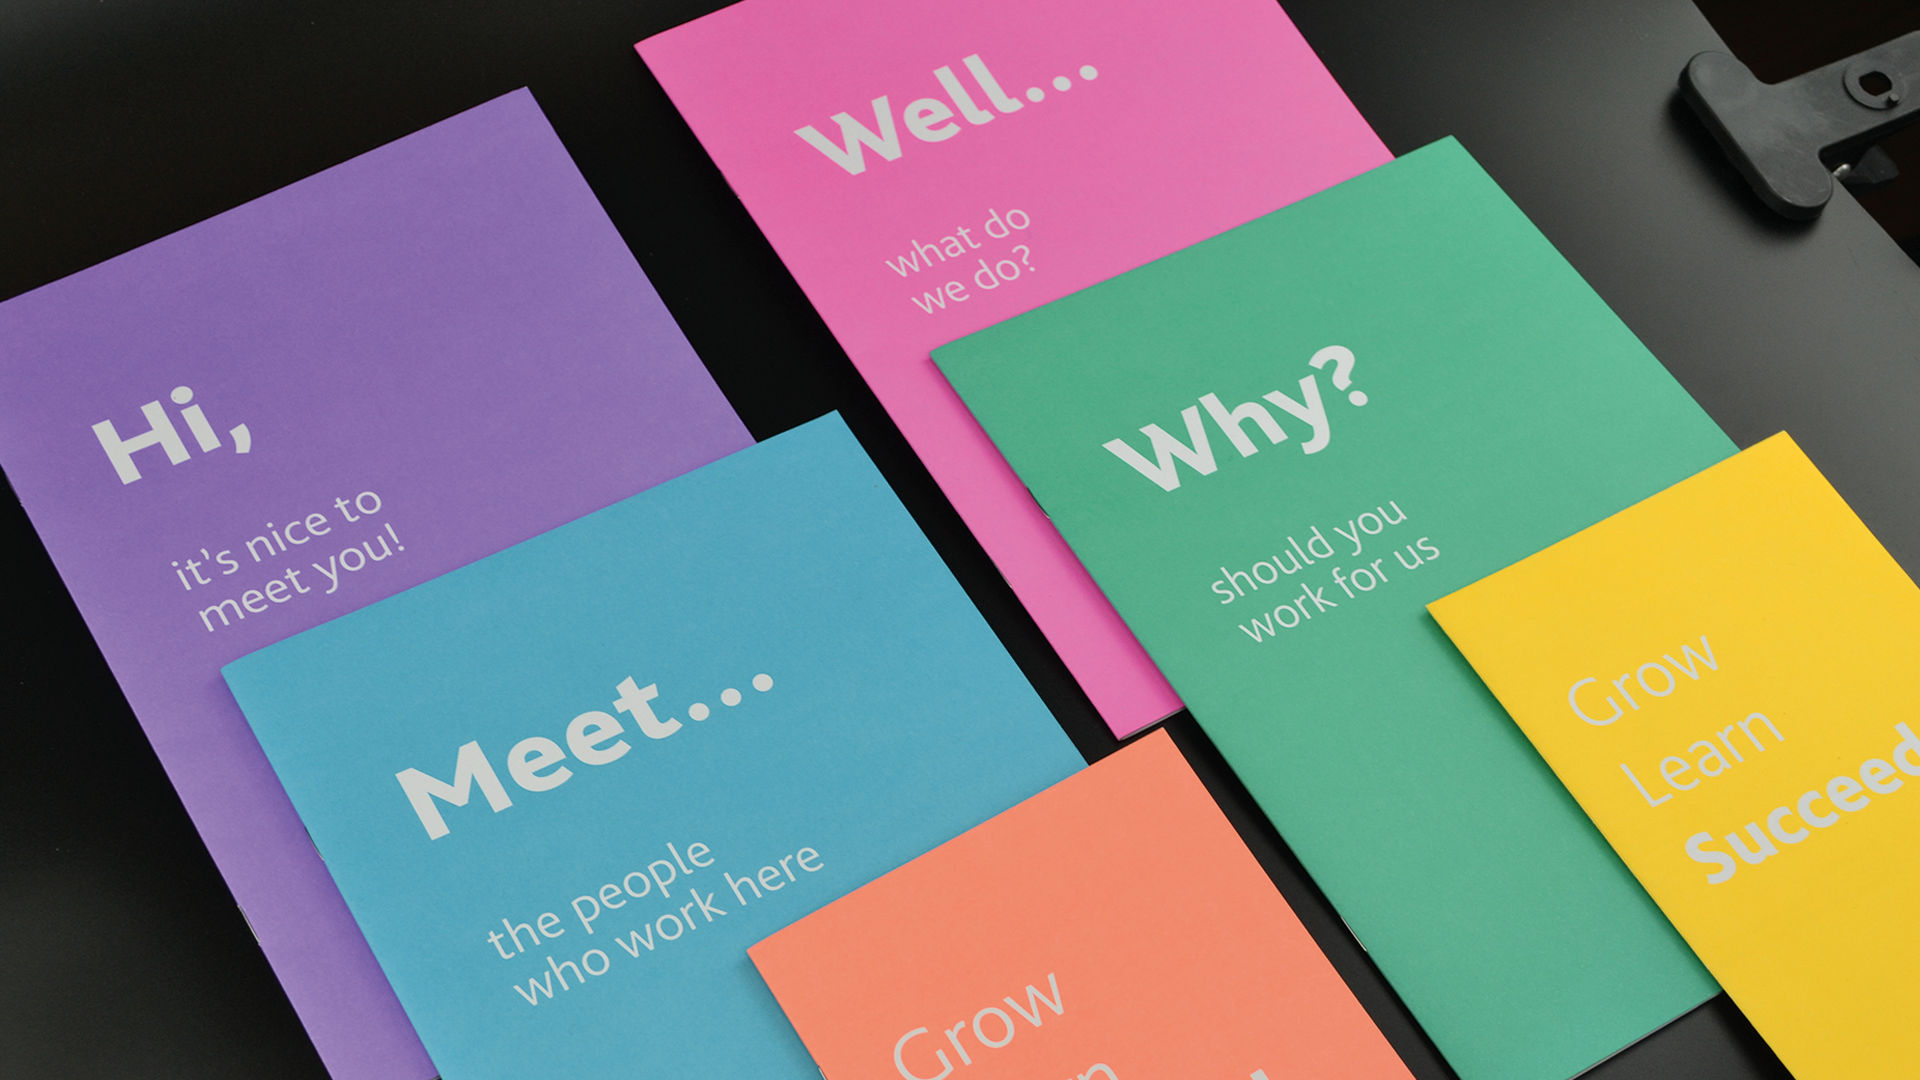 Recruitment materials design and print by Liam Mulherin